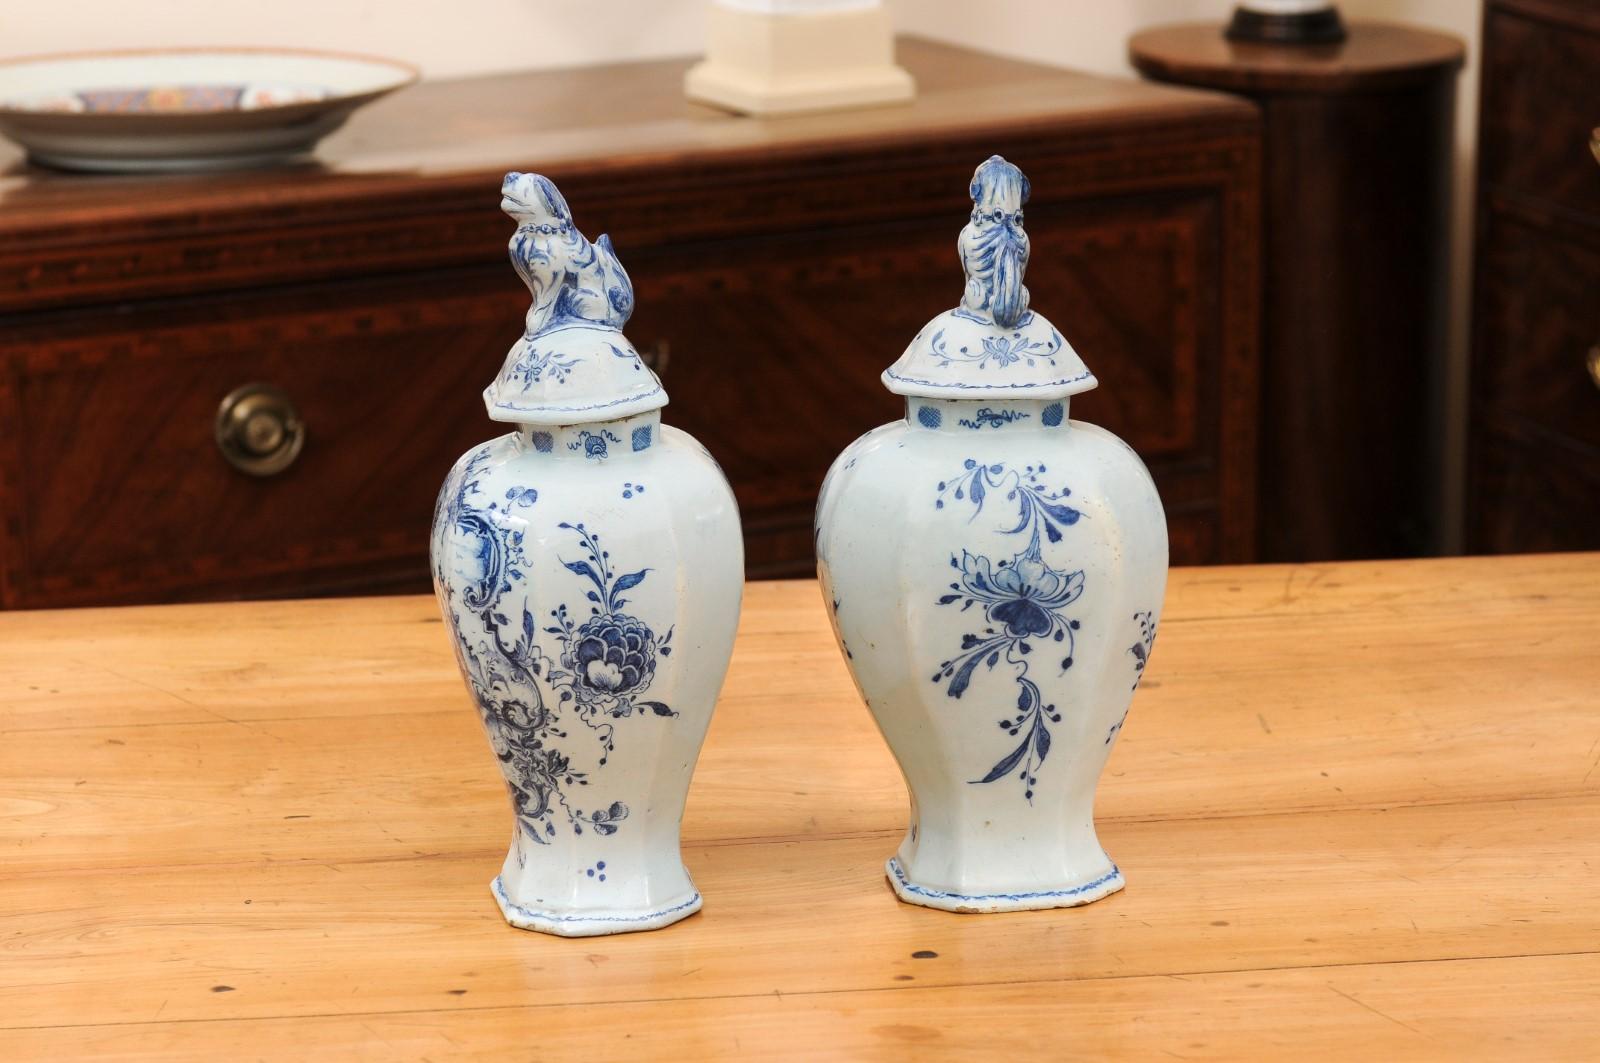 Pair of Late 18th Century Italian Porcelain Garniture Urns with Lids For Sale 9